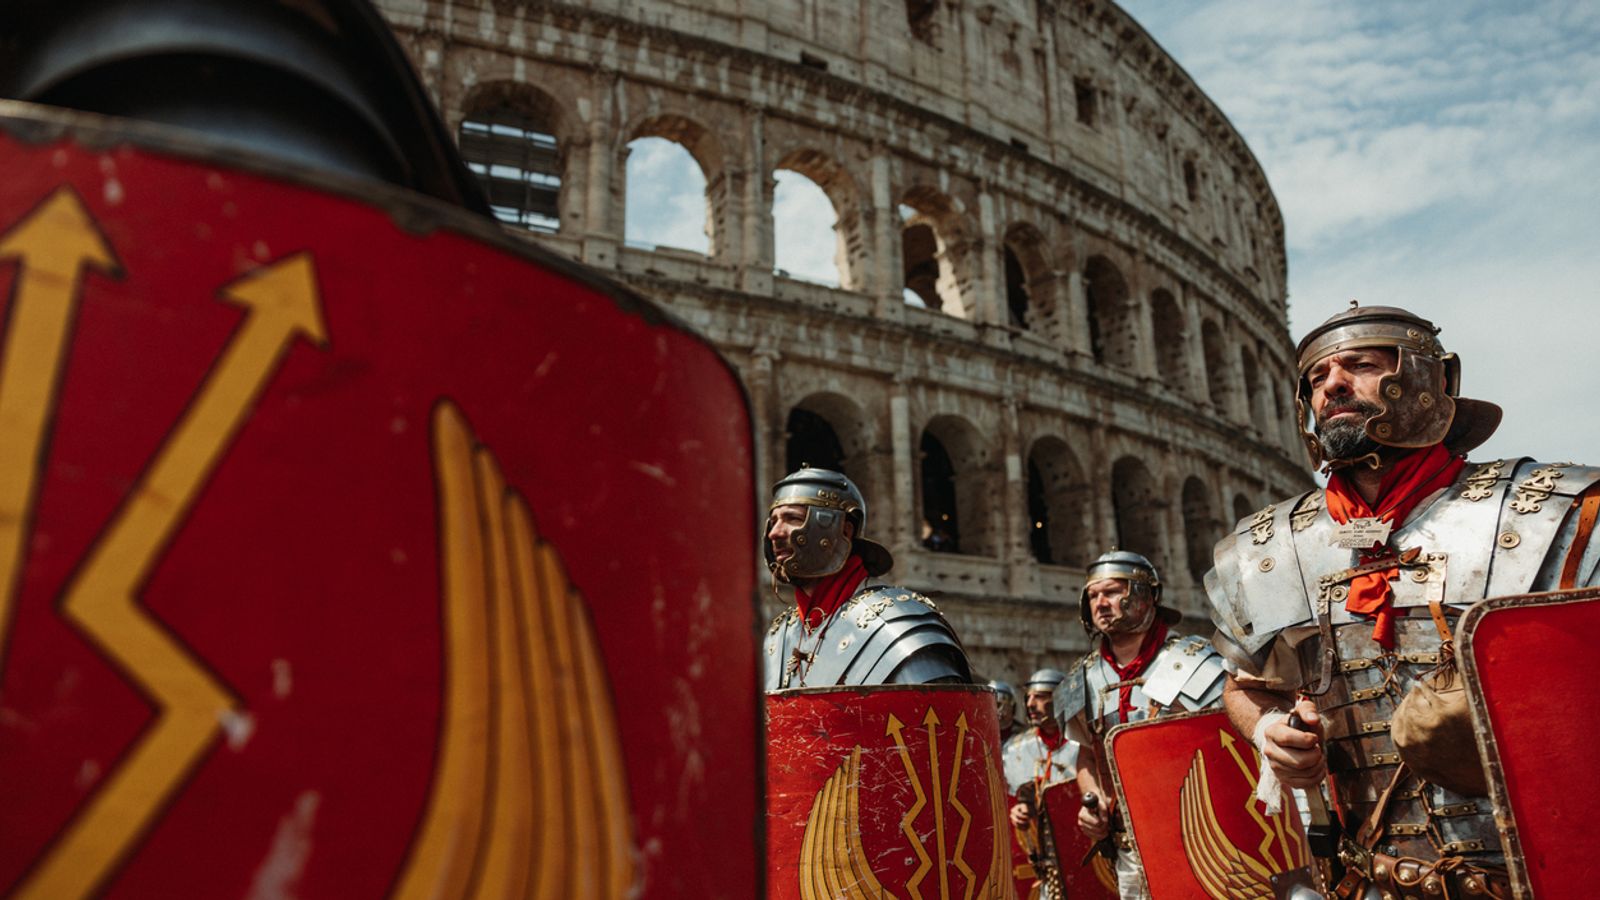 How often do you think about the Roman Empire? Expert has thoughts on the new TikTok trend